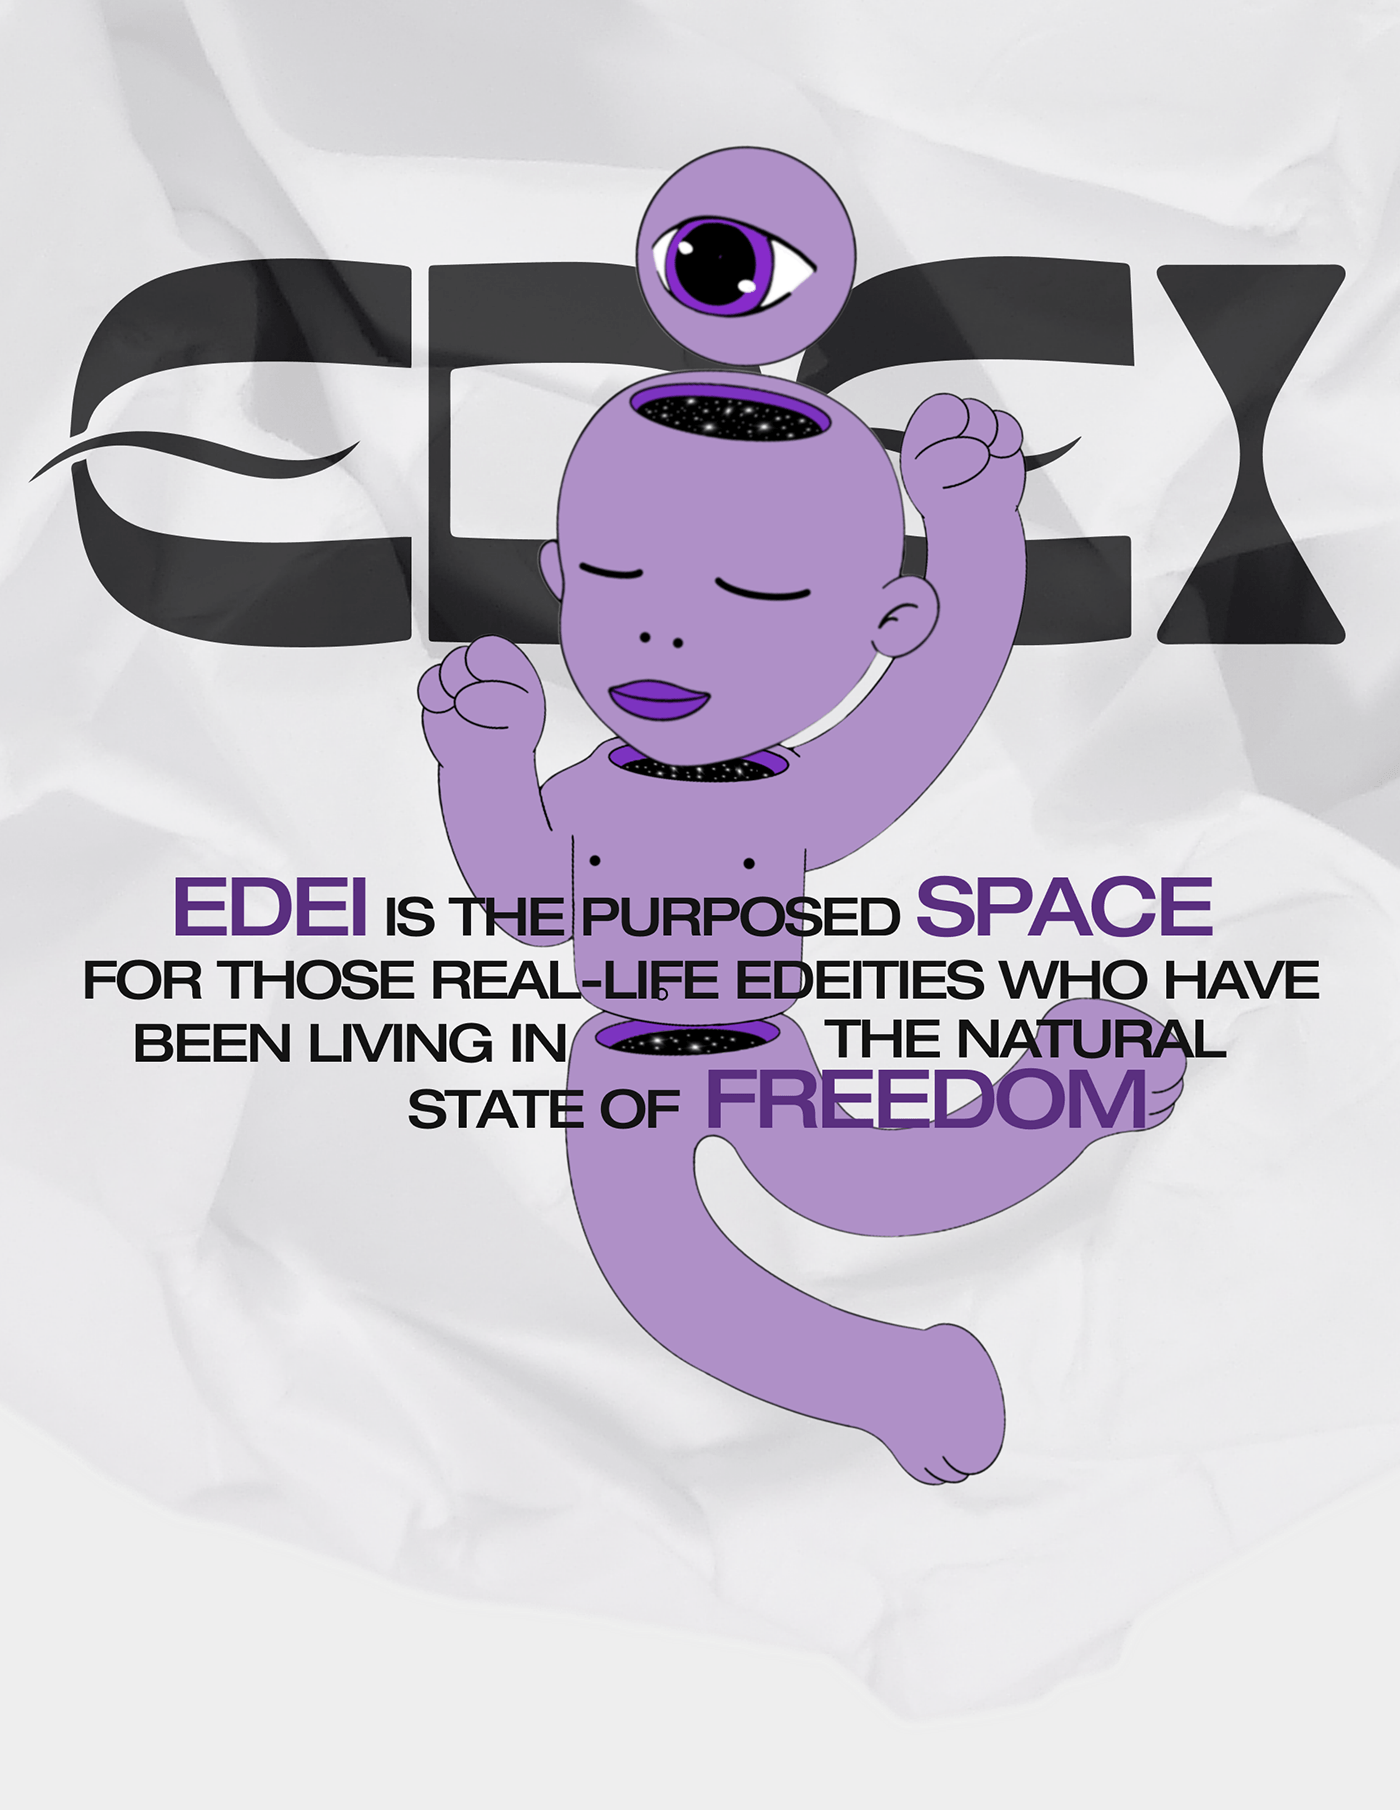 EDEI is the purposed space for those real-life Edeities who have been living in the state of freedom